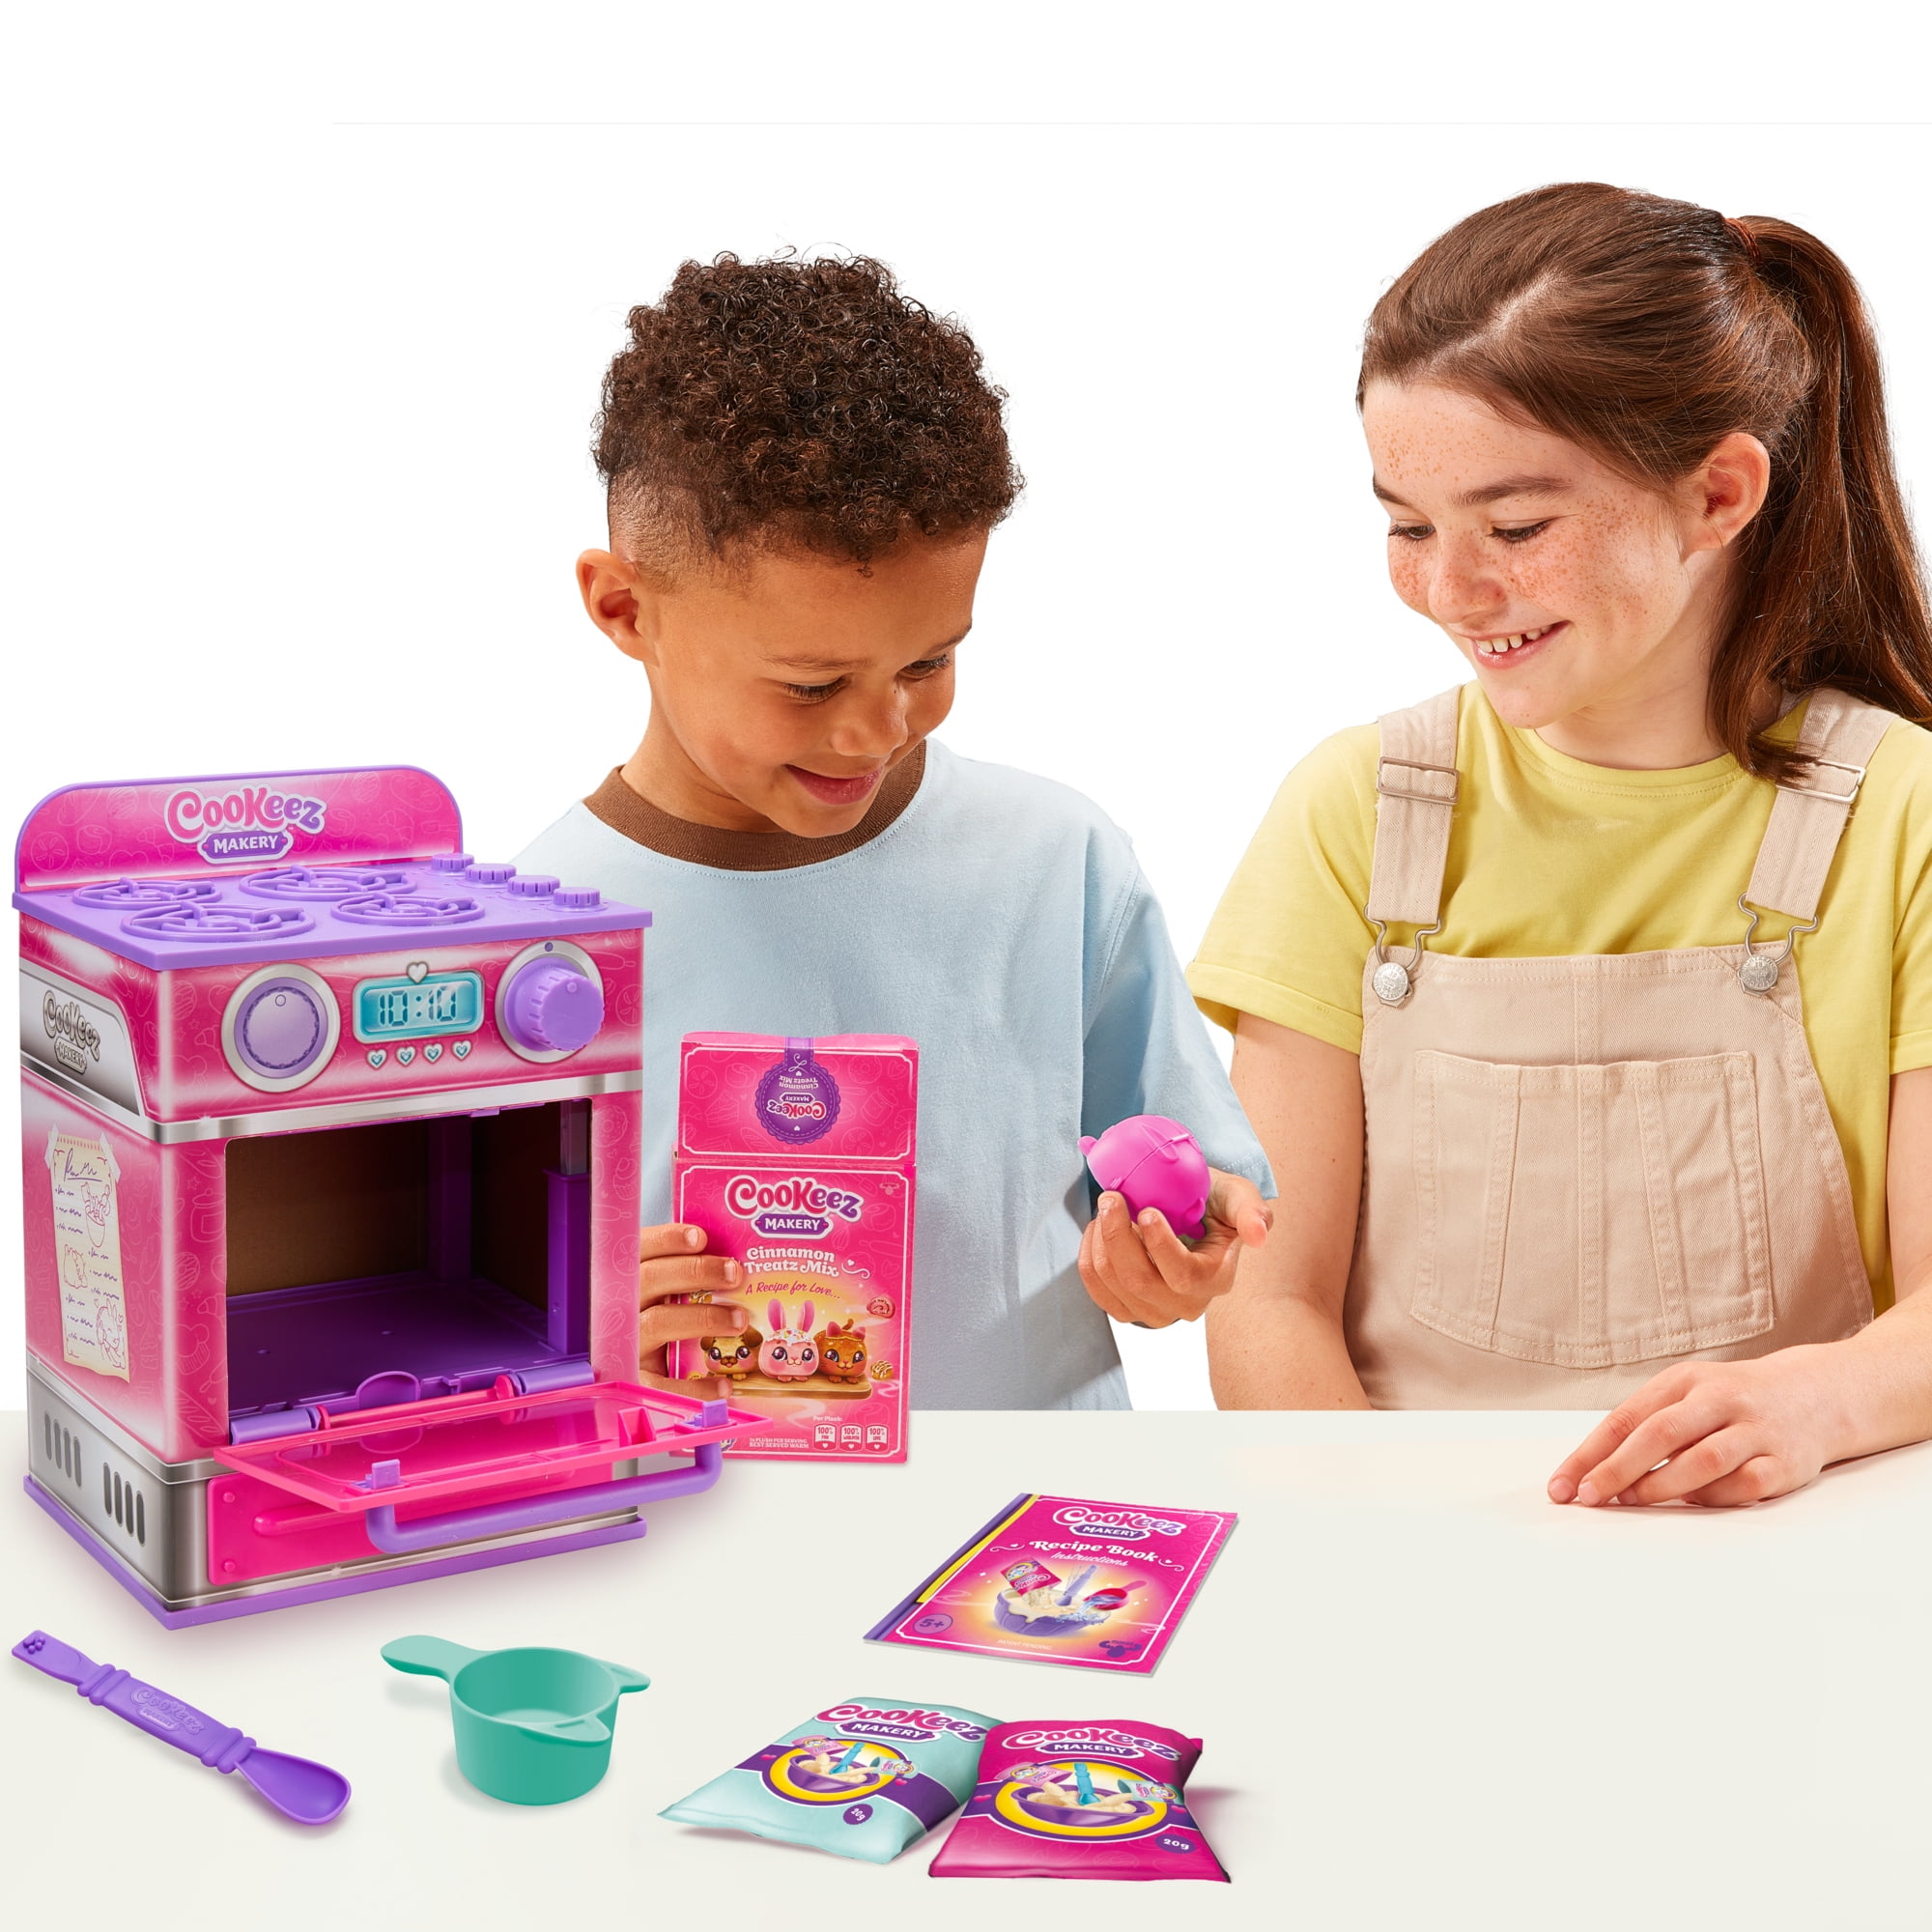 Cookeez Makery Cinnamon Treatz Pink Oven, Scented, Interactive Plush,  Styles Vary, Ages 5+ 